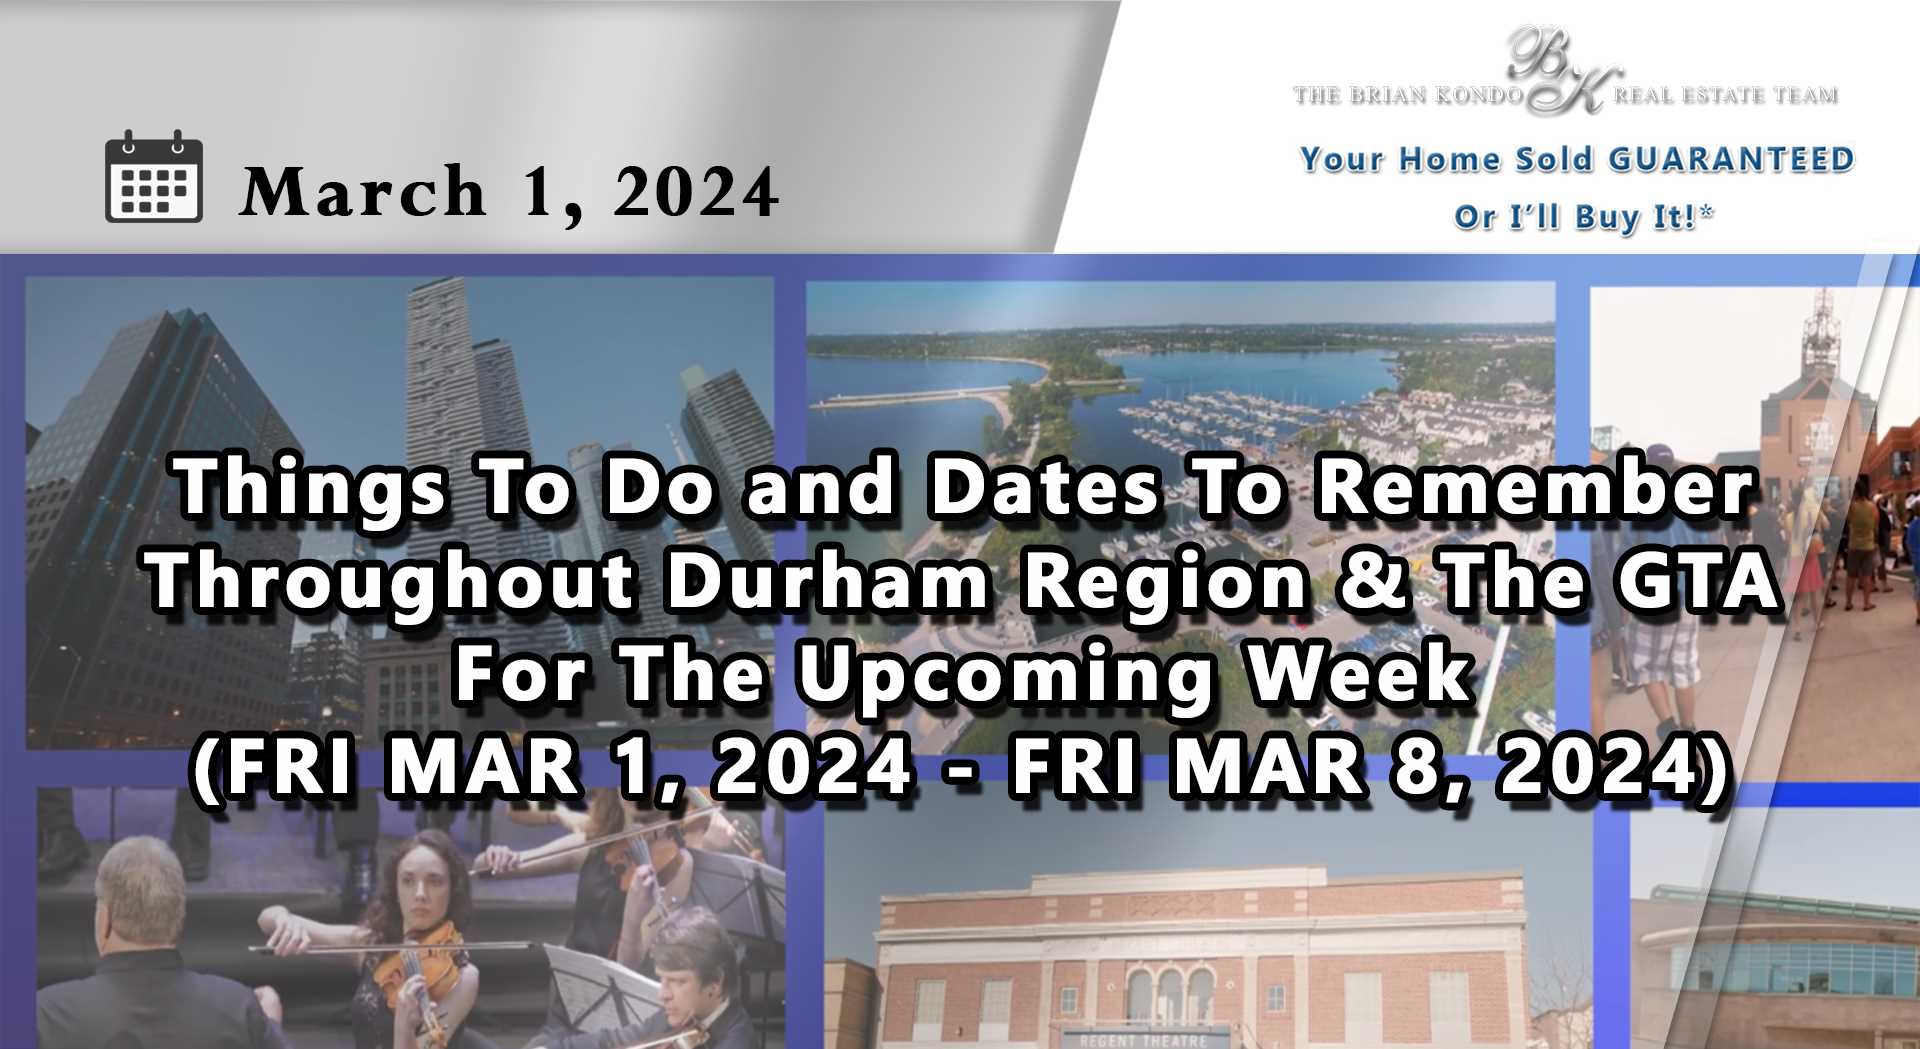 Things To Do and Dates To Remember Throughout Durham Region and The GTA For The Upcoming Week (FRI FEB 23, 2024 - FRI MAR 1, 2024)